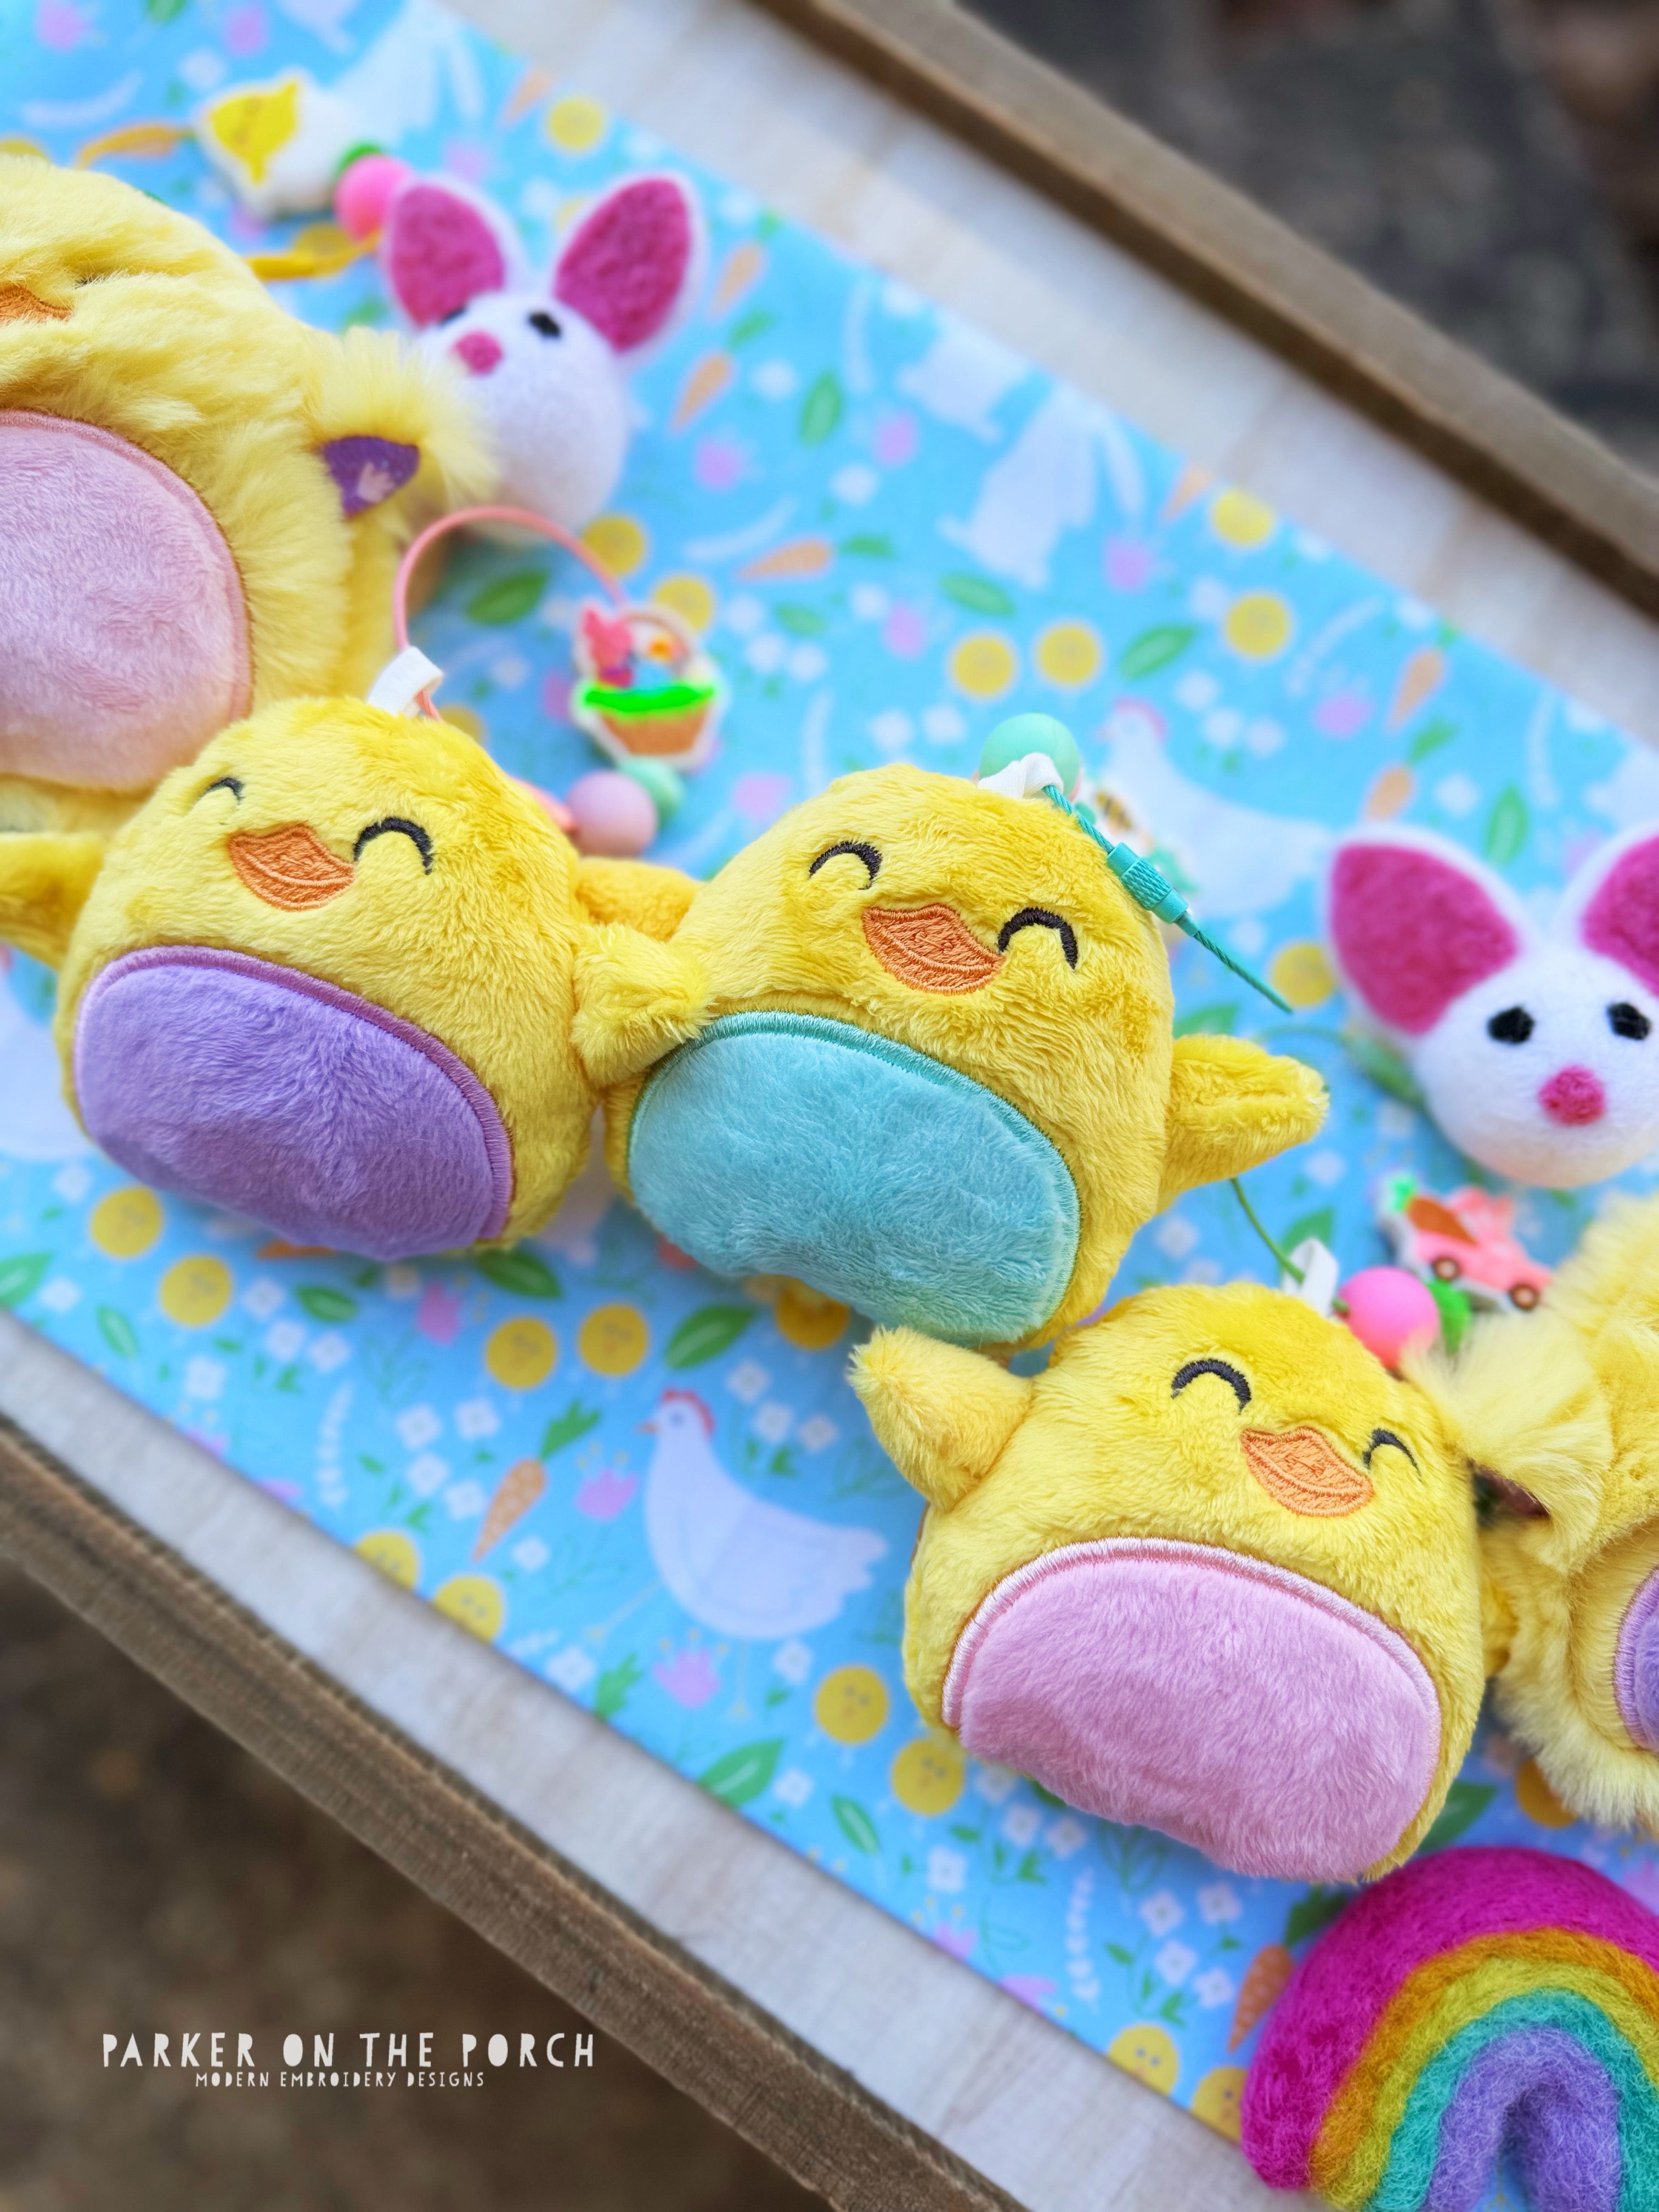 Squishy Frogs & Ducks for Easter